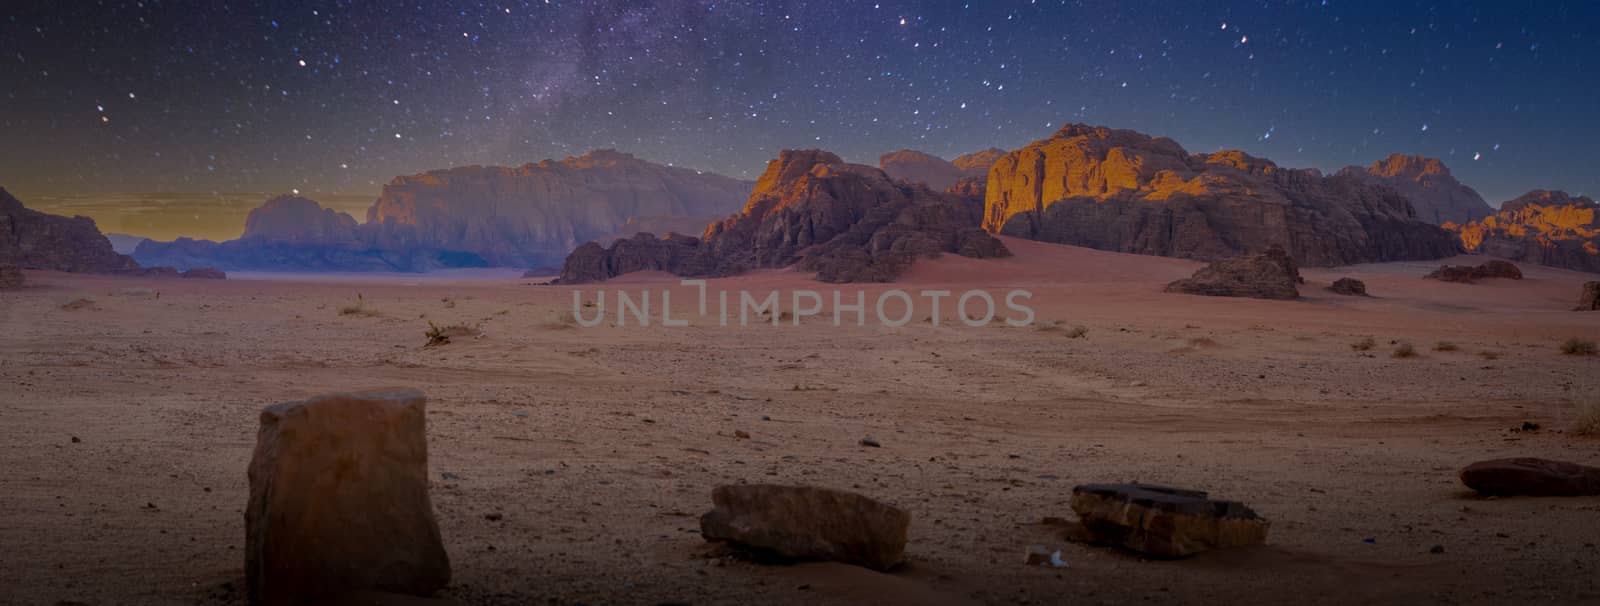 Desert and rocks on extraterrestrial or alien planet in the universe with view on space and galaxy. Sci-fi.